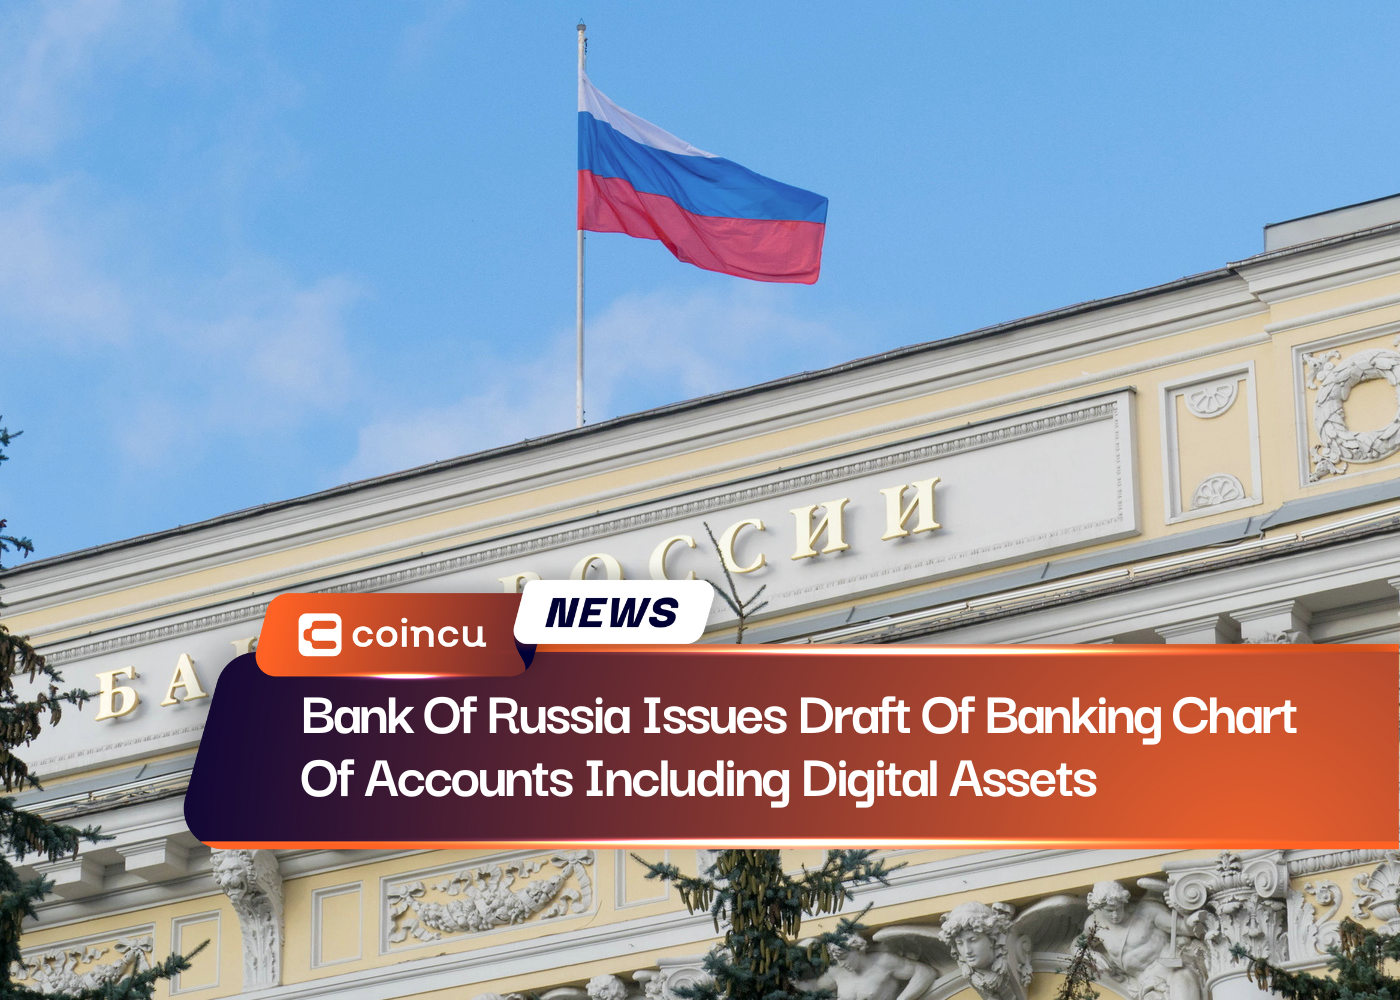 Bank Of Russia Issues Draft Of Banking Chart Of Accounts Including Digital Assets